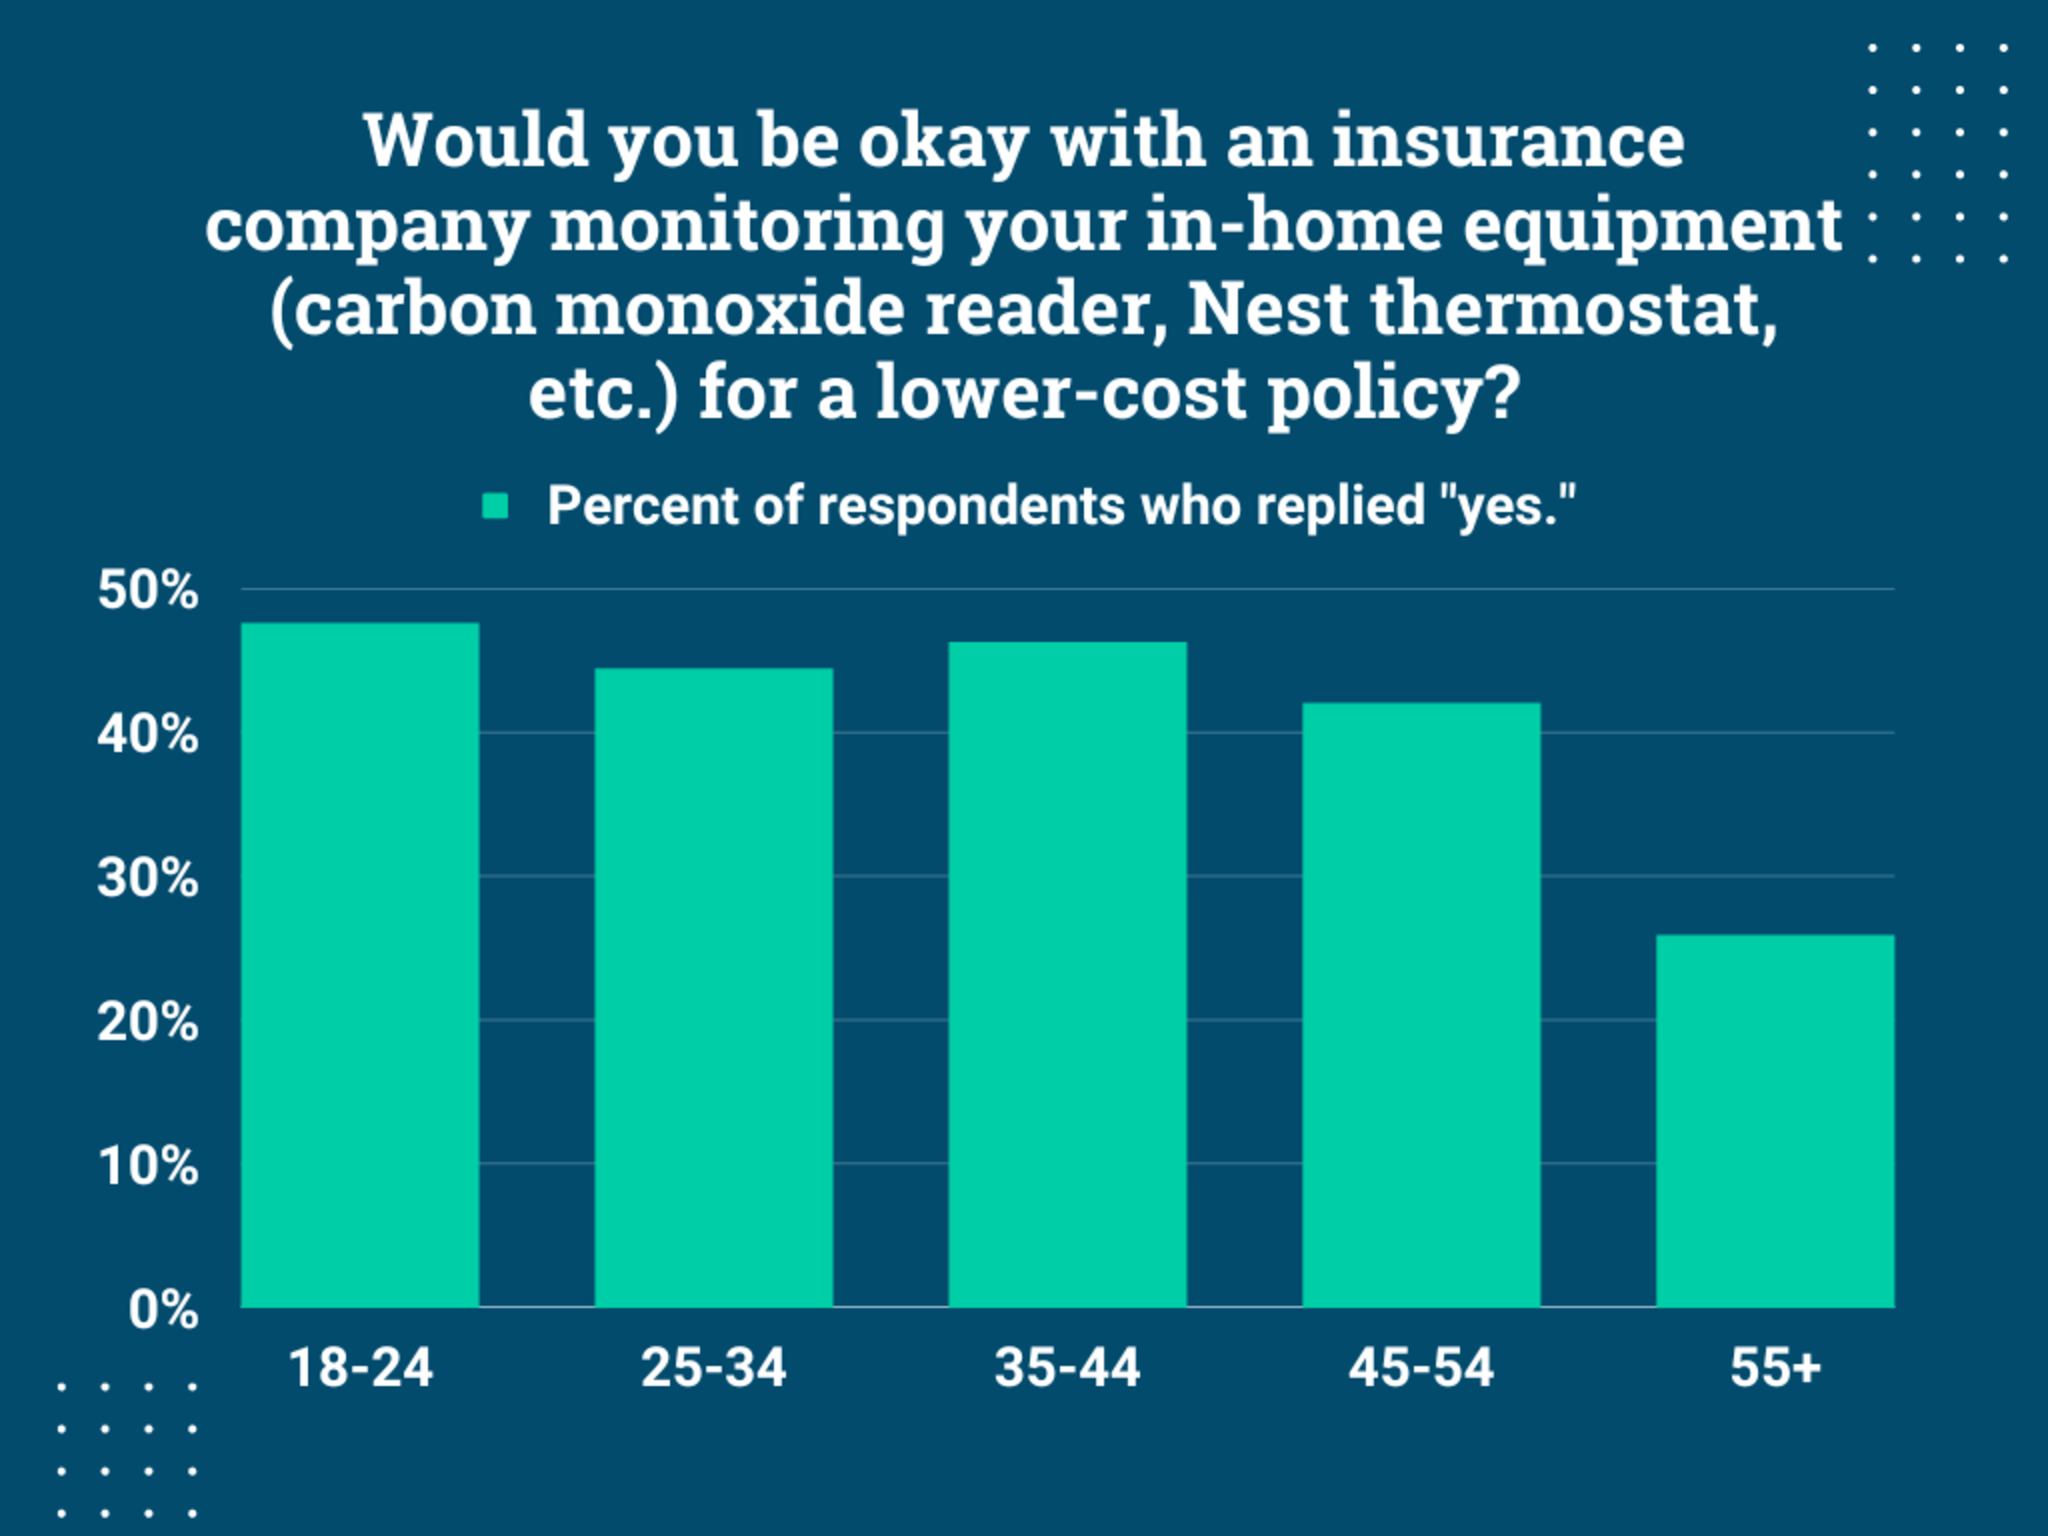 Would you be okay with an insurance company monitoring your in-home equipment (carbon monoxide reader, Nest thermostat, etc.) for a lower-cost policy